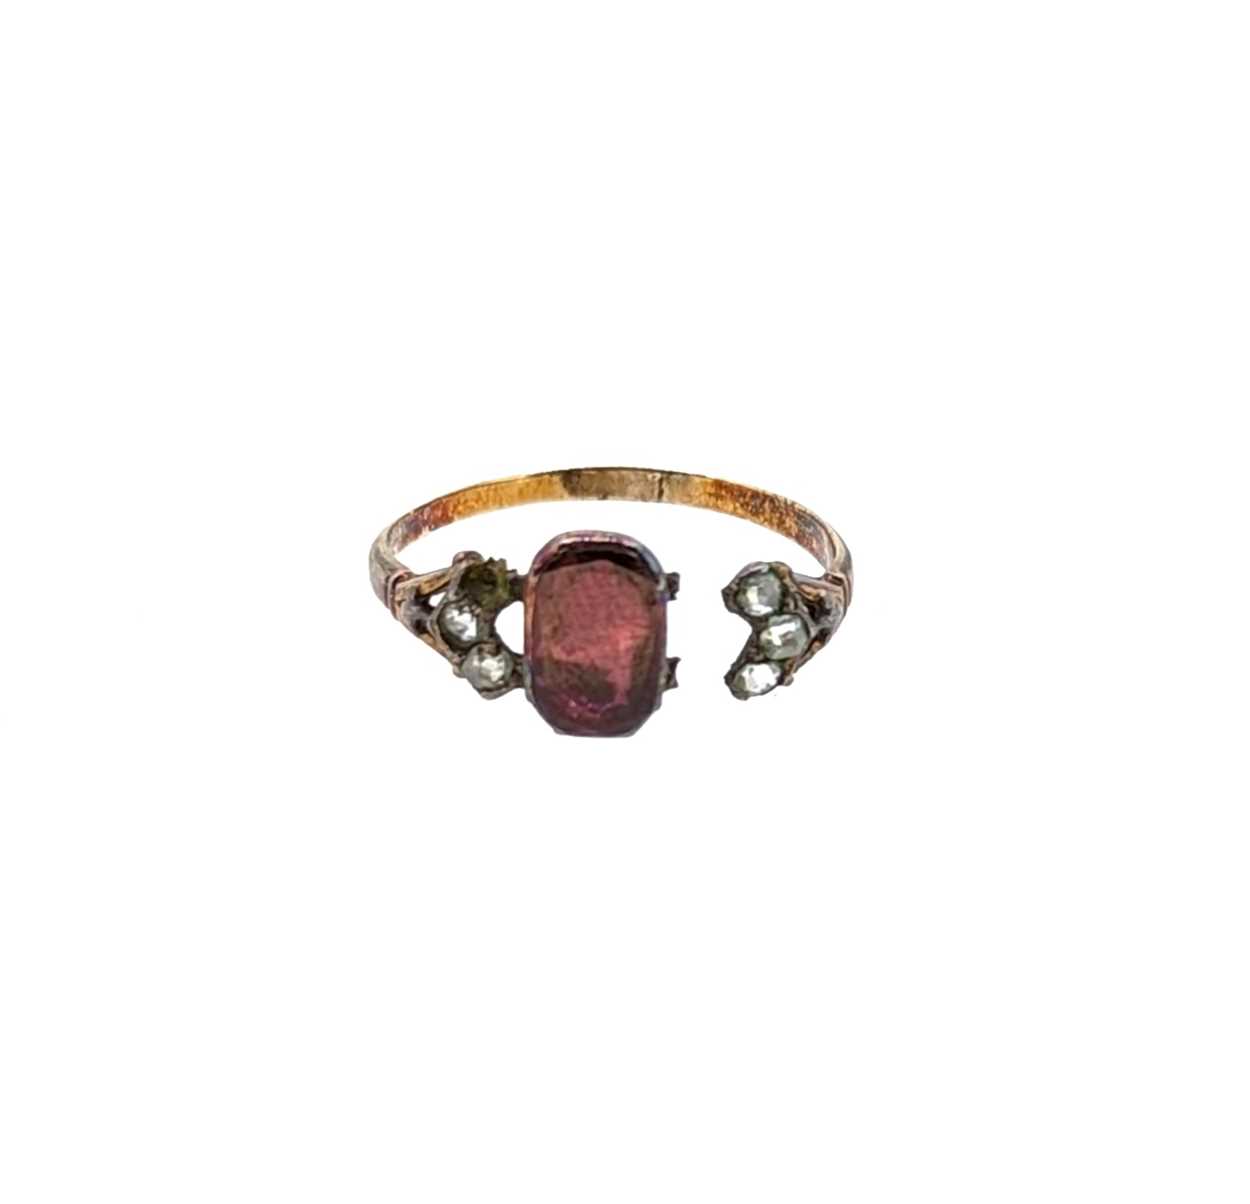 A 19th century foil backed garnet memorial heart pendant and ring, - Image 5 of 8